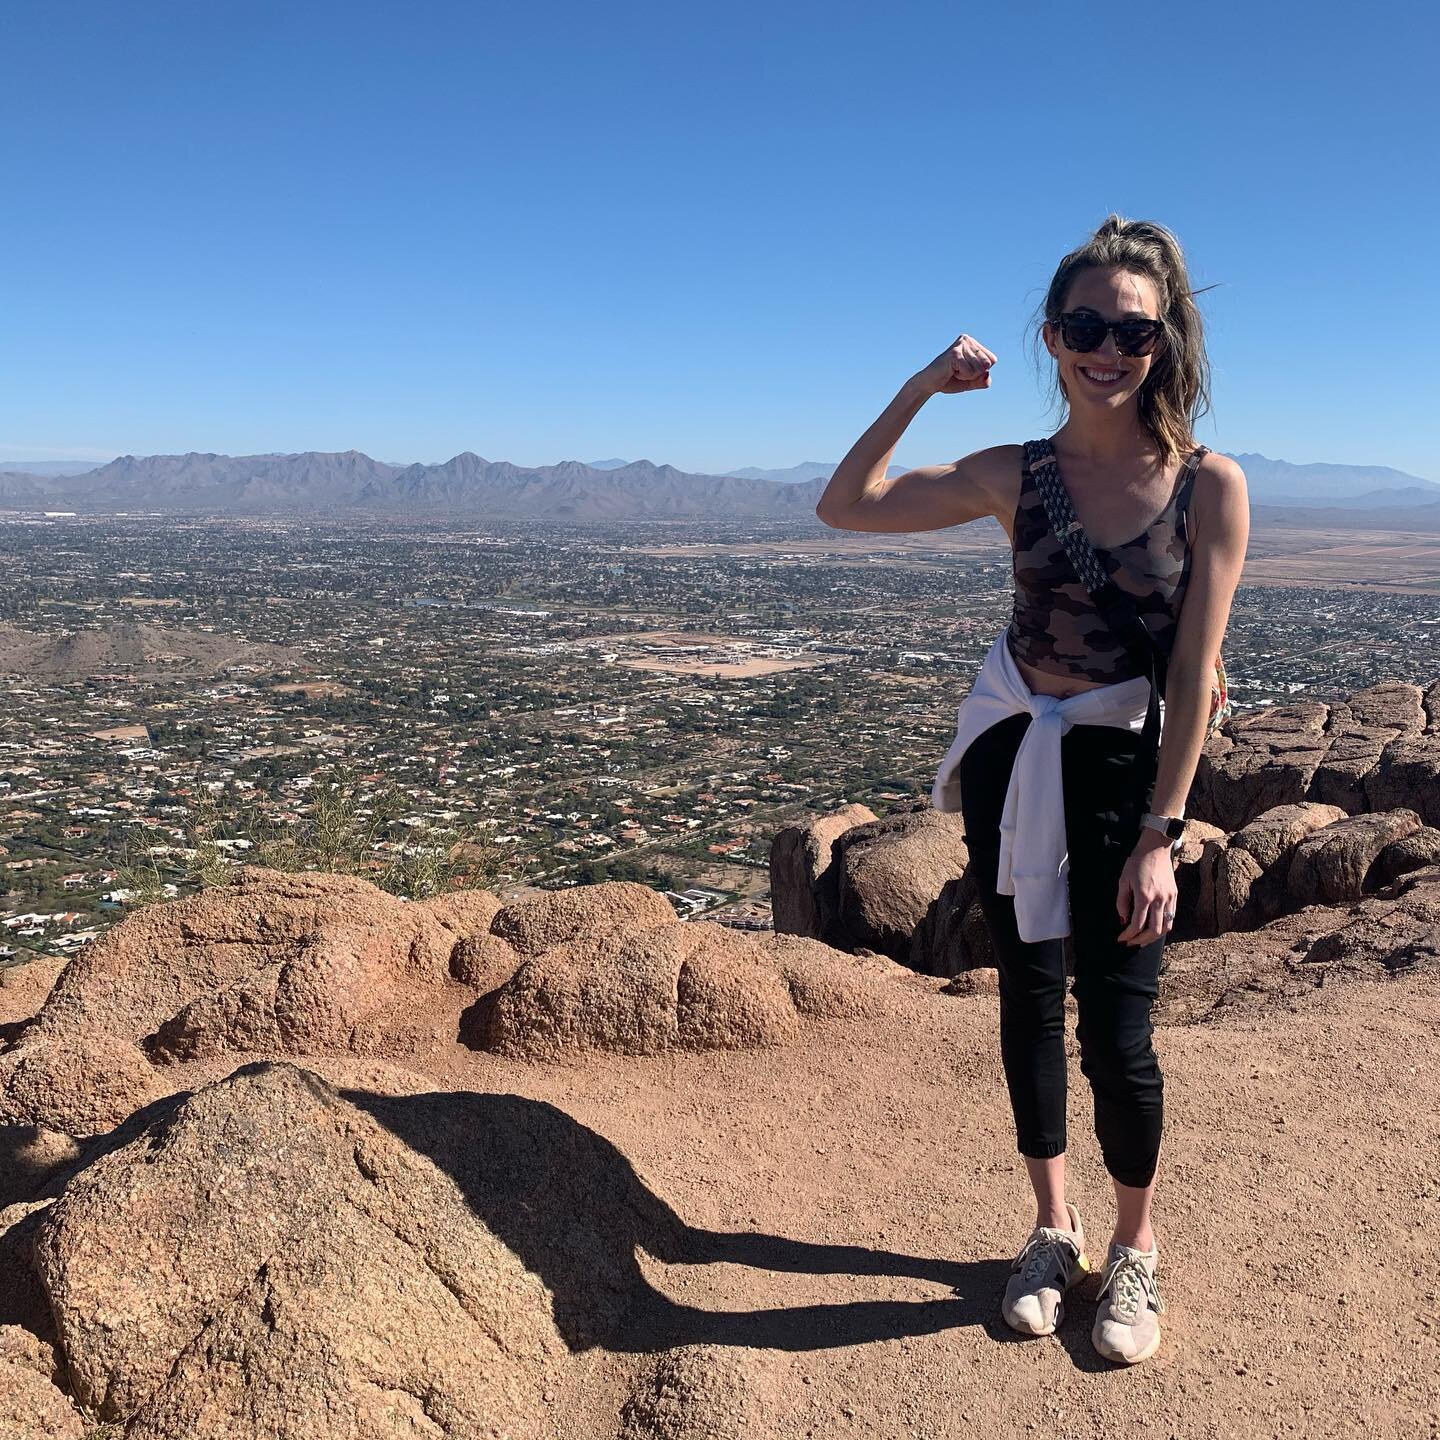 Made it to the top. 

This is my why. I want to be able to conquer the hard and have the discipline to keep to going. This is applied in everything from getting through a toddler tantrum to hiking Camel Back mountain. 

Get to the top. 

#fitmoms #fi